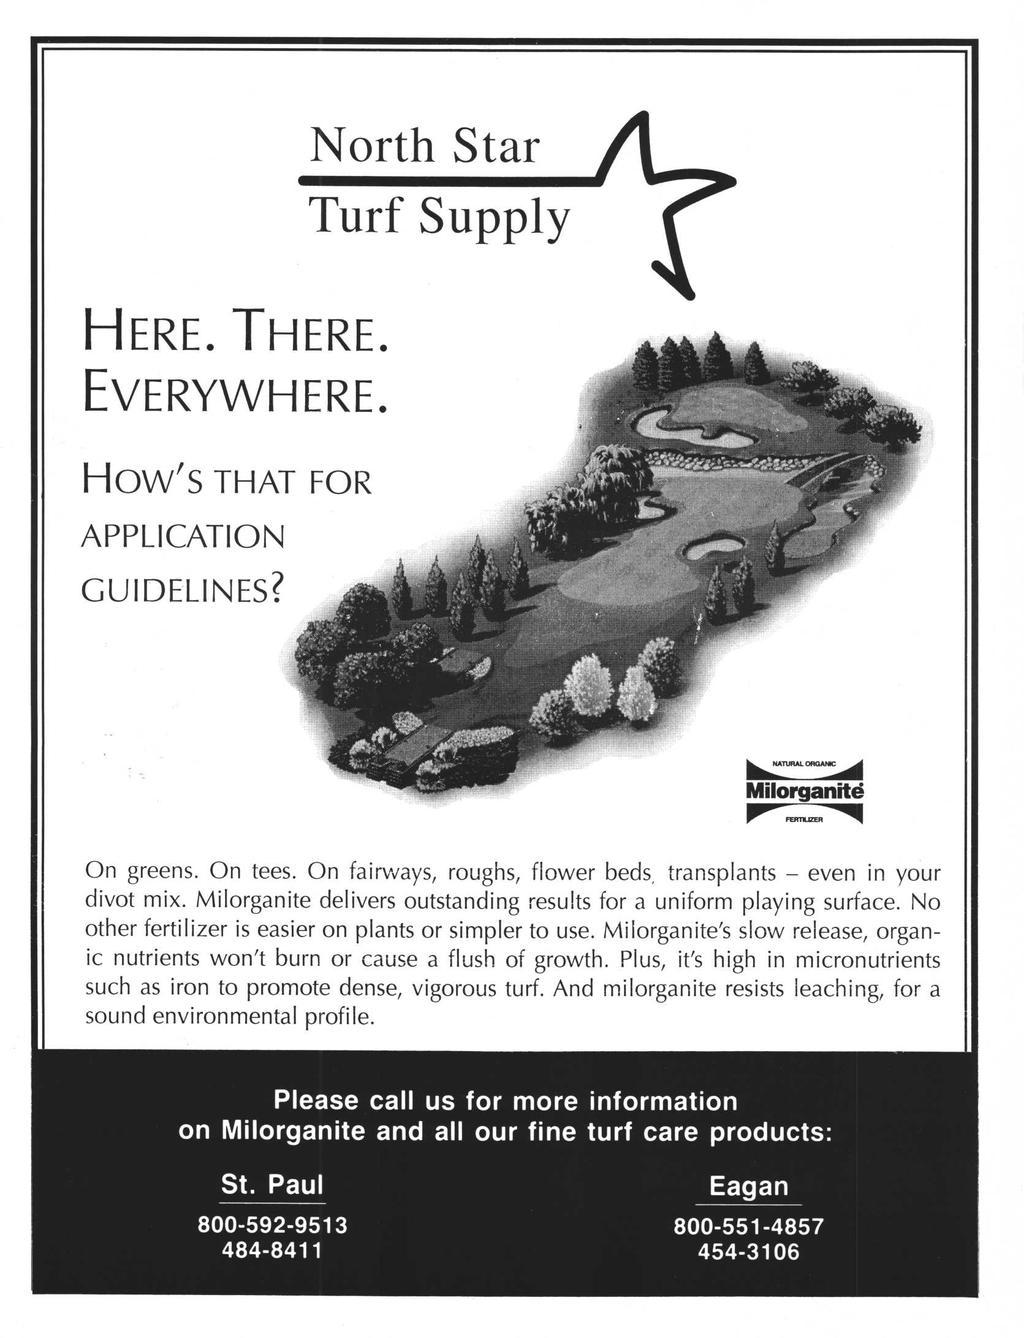 HERE. THERE. EVERYWHERE. HOW'S THAT FOR APPLICATION GUIDELINES? North Star Turf Supply On greens. On tees. On fairways, roughs, flower beds, transplants - even in your divot mix.